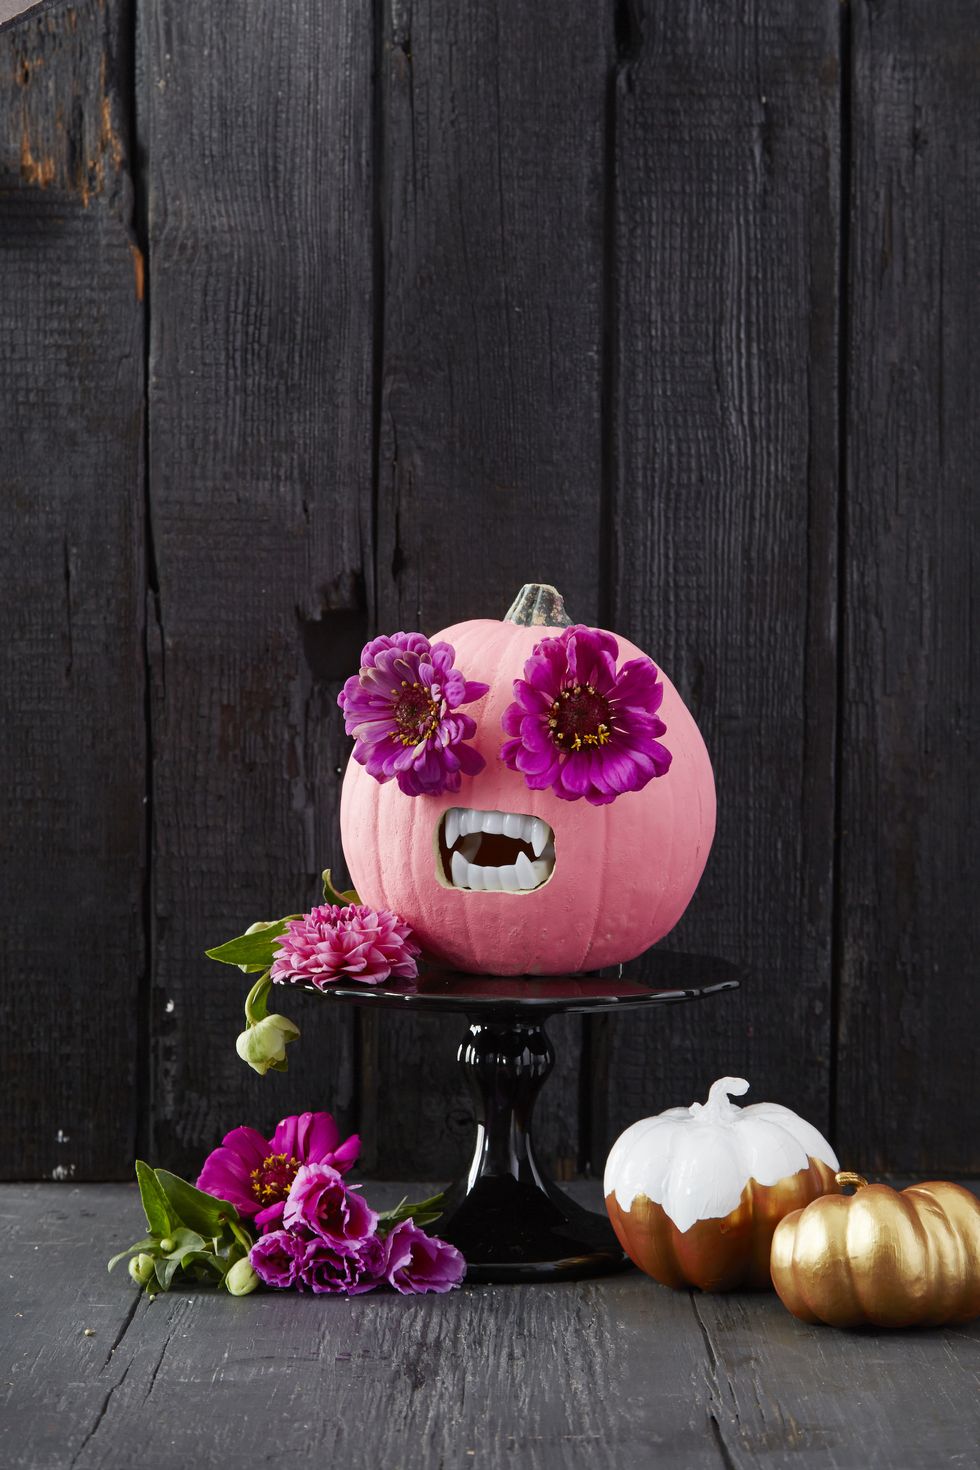 Pink pumpkin with flower eyes and playful vampire teeth, set against a backdrop of dark brown wooden flooring and walls